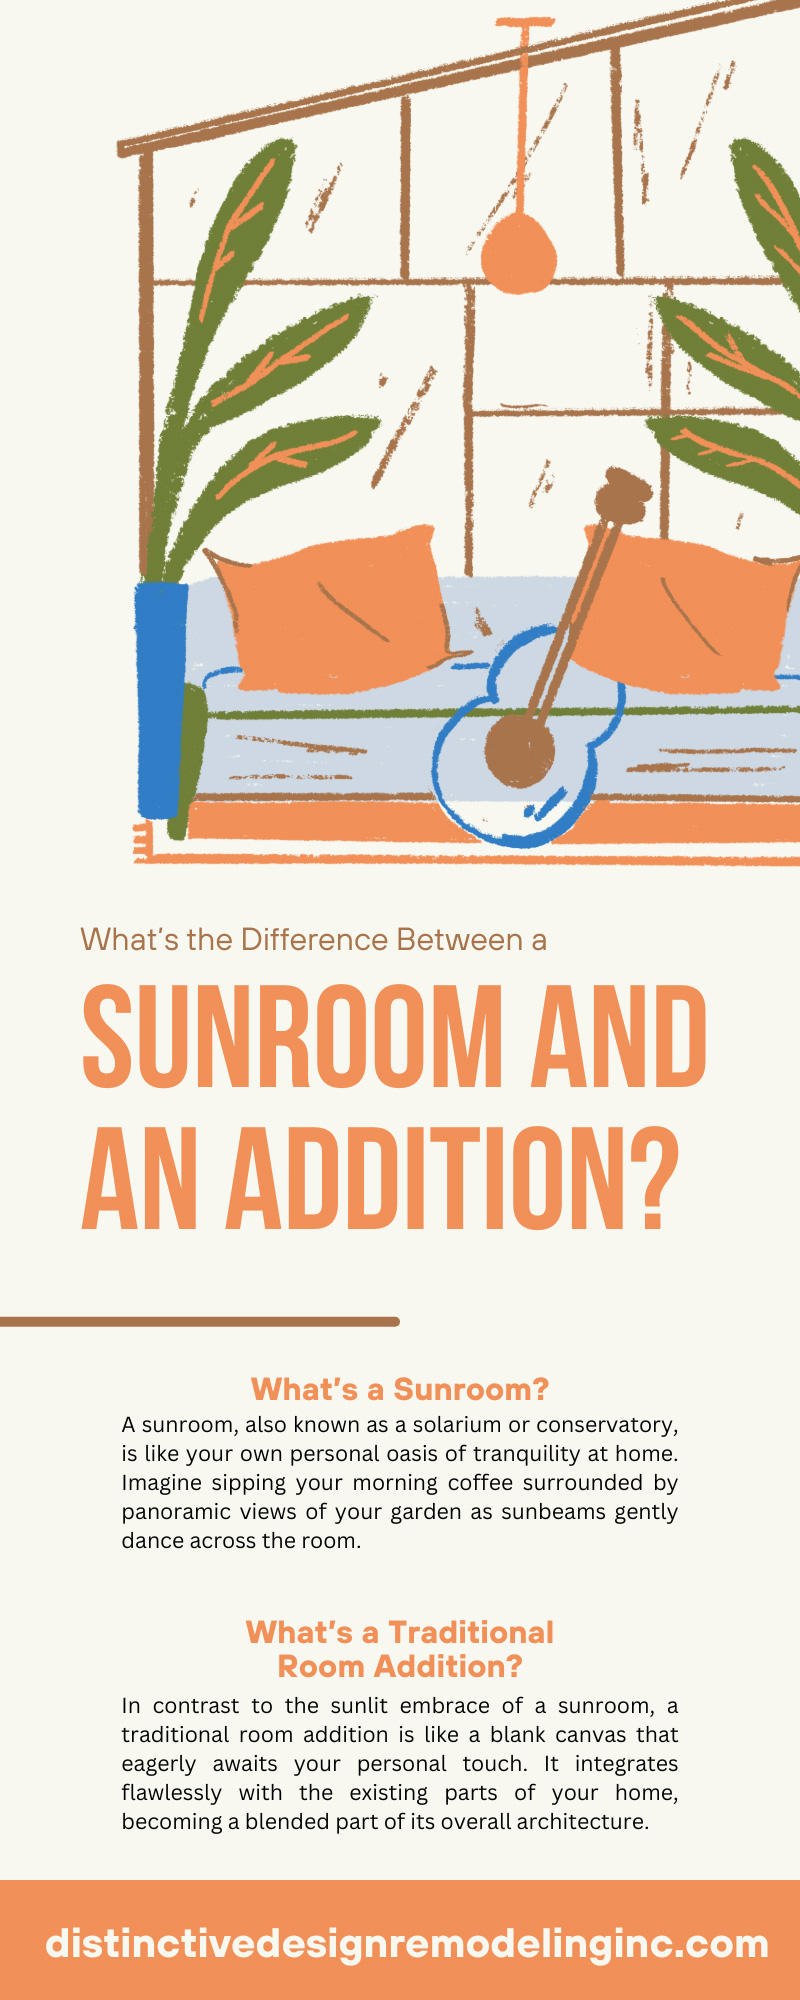 What’s the Difference Between a Sunroom and an Addition?